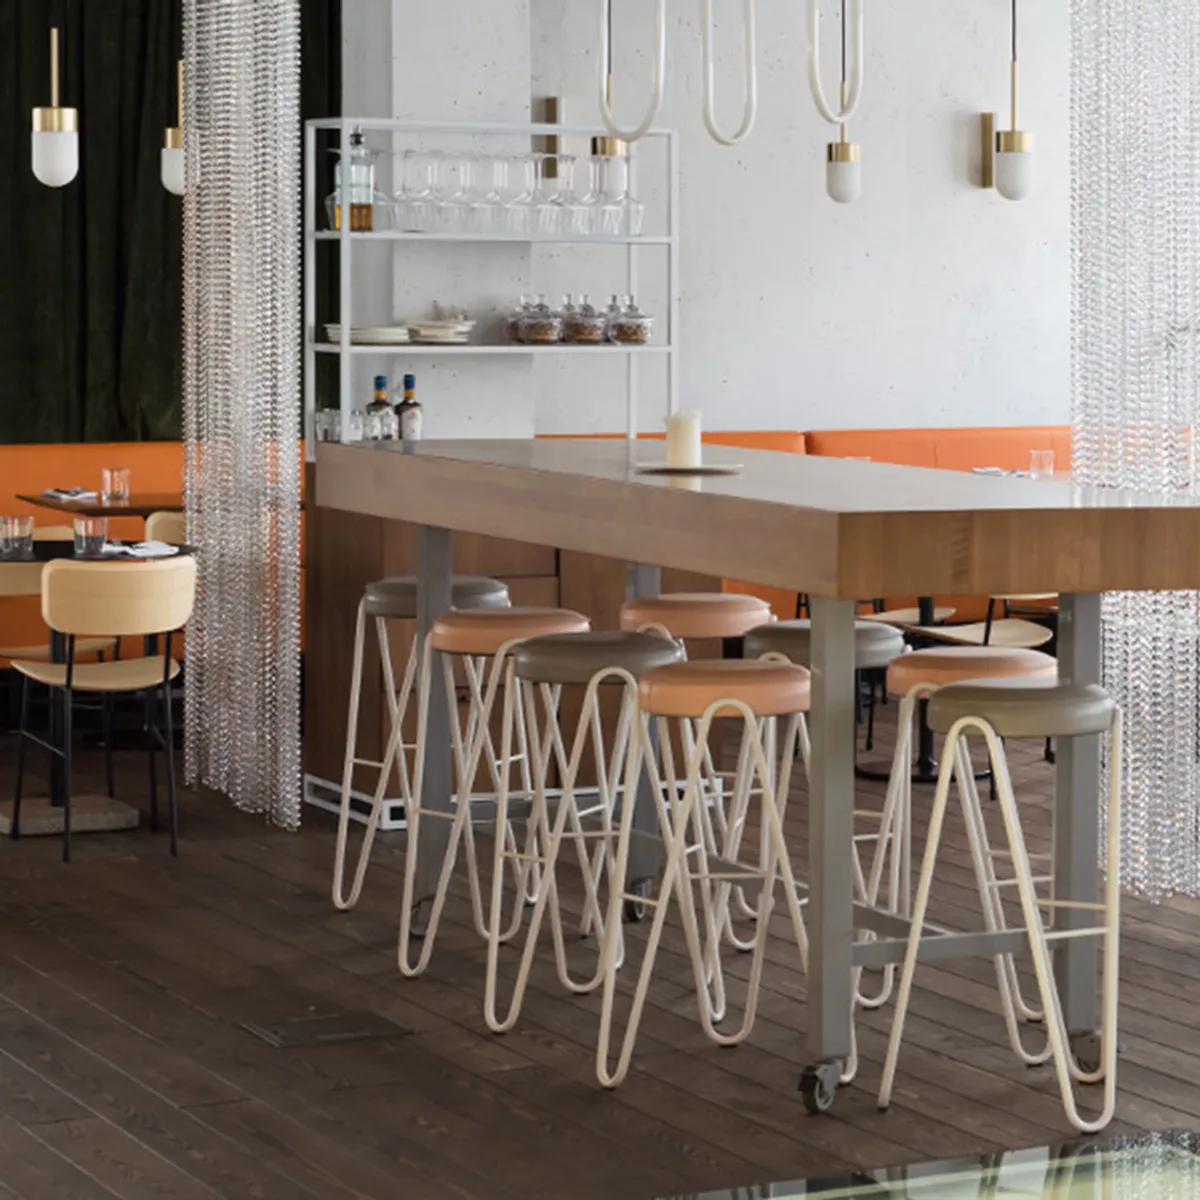 Apelle Bar Stools Restaurant Inside Out Contracts 013